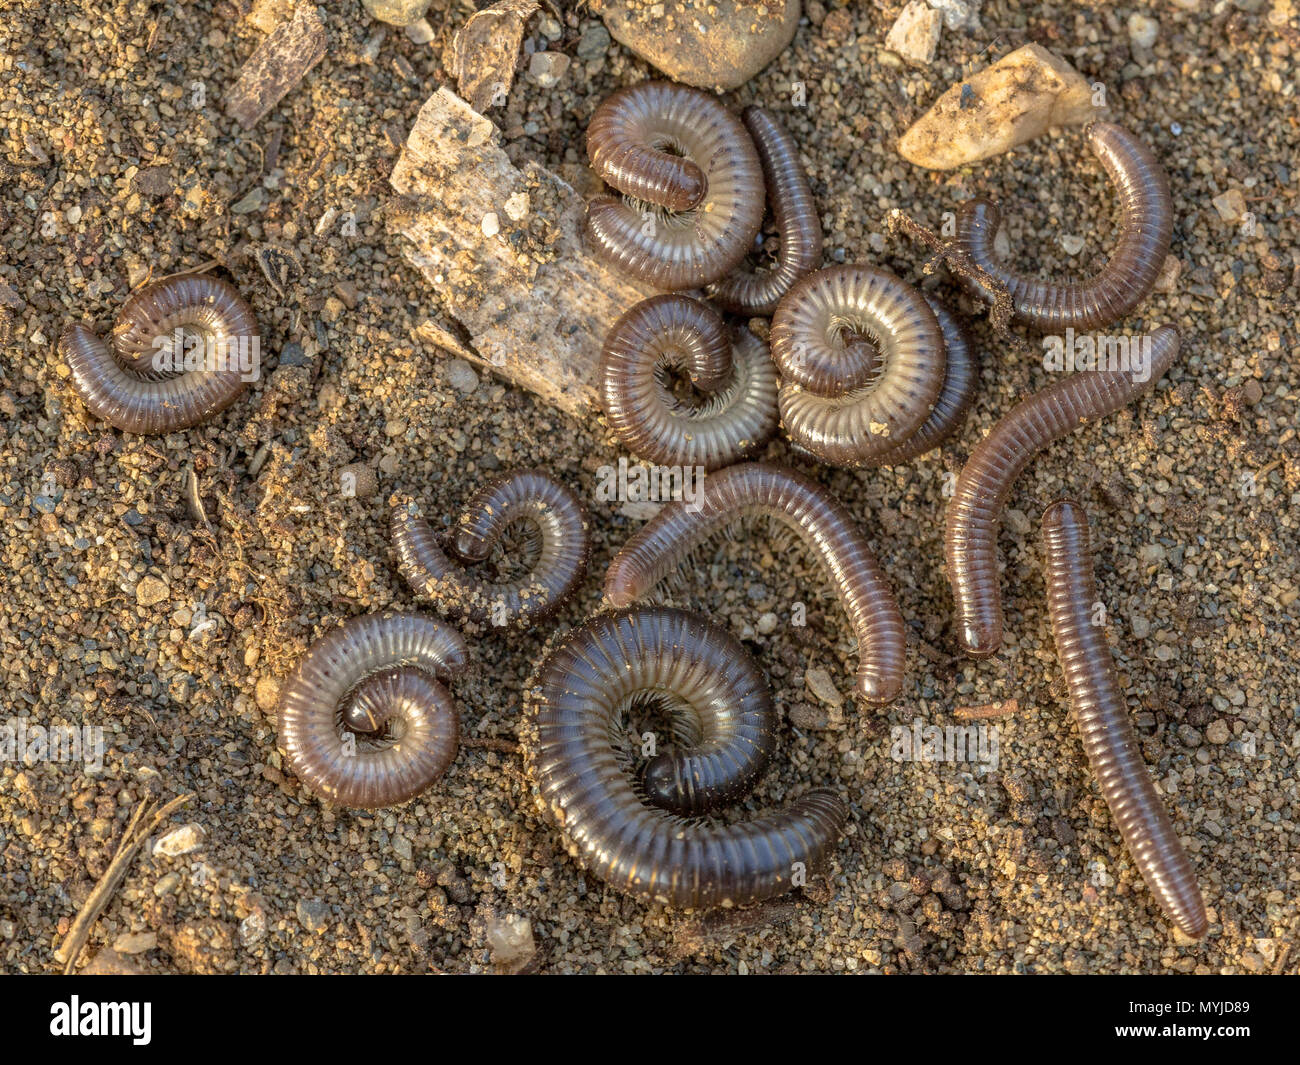 Group of sleeping millipedes discovered under a stone Stock Photo